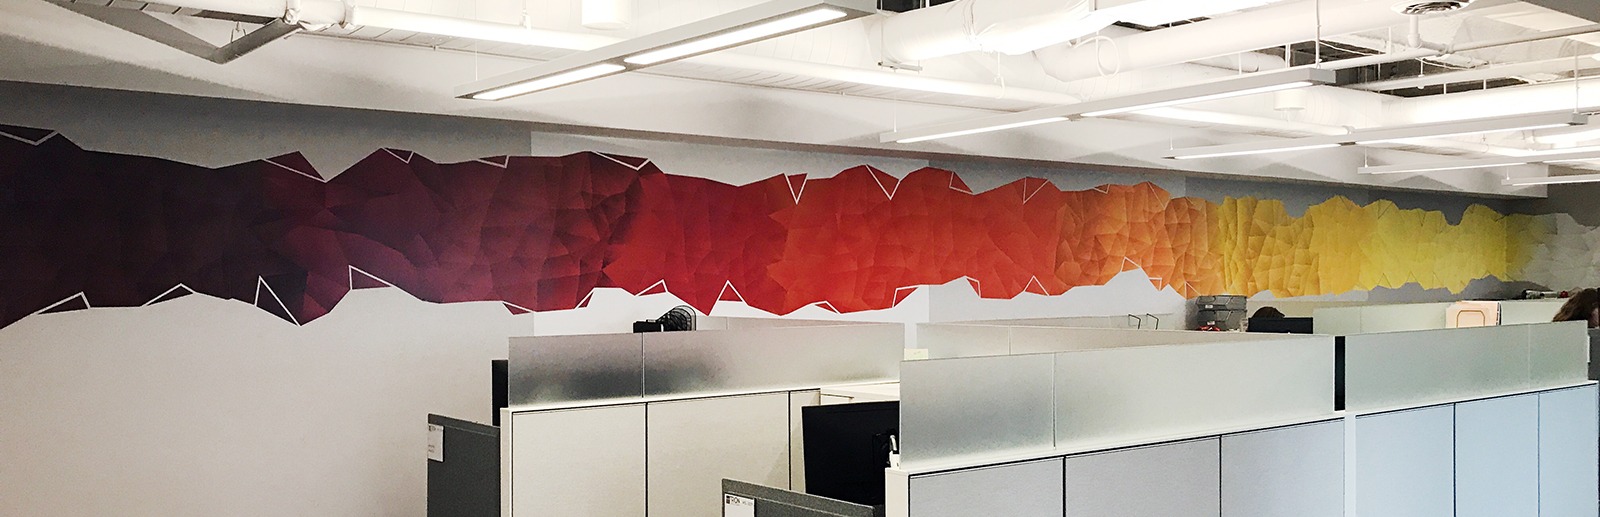 Trion Corporate Wall Graphics Header